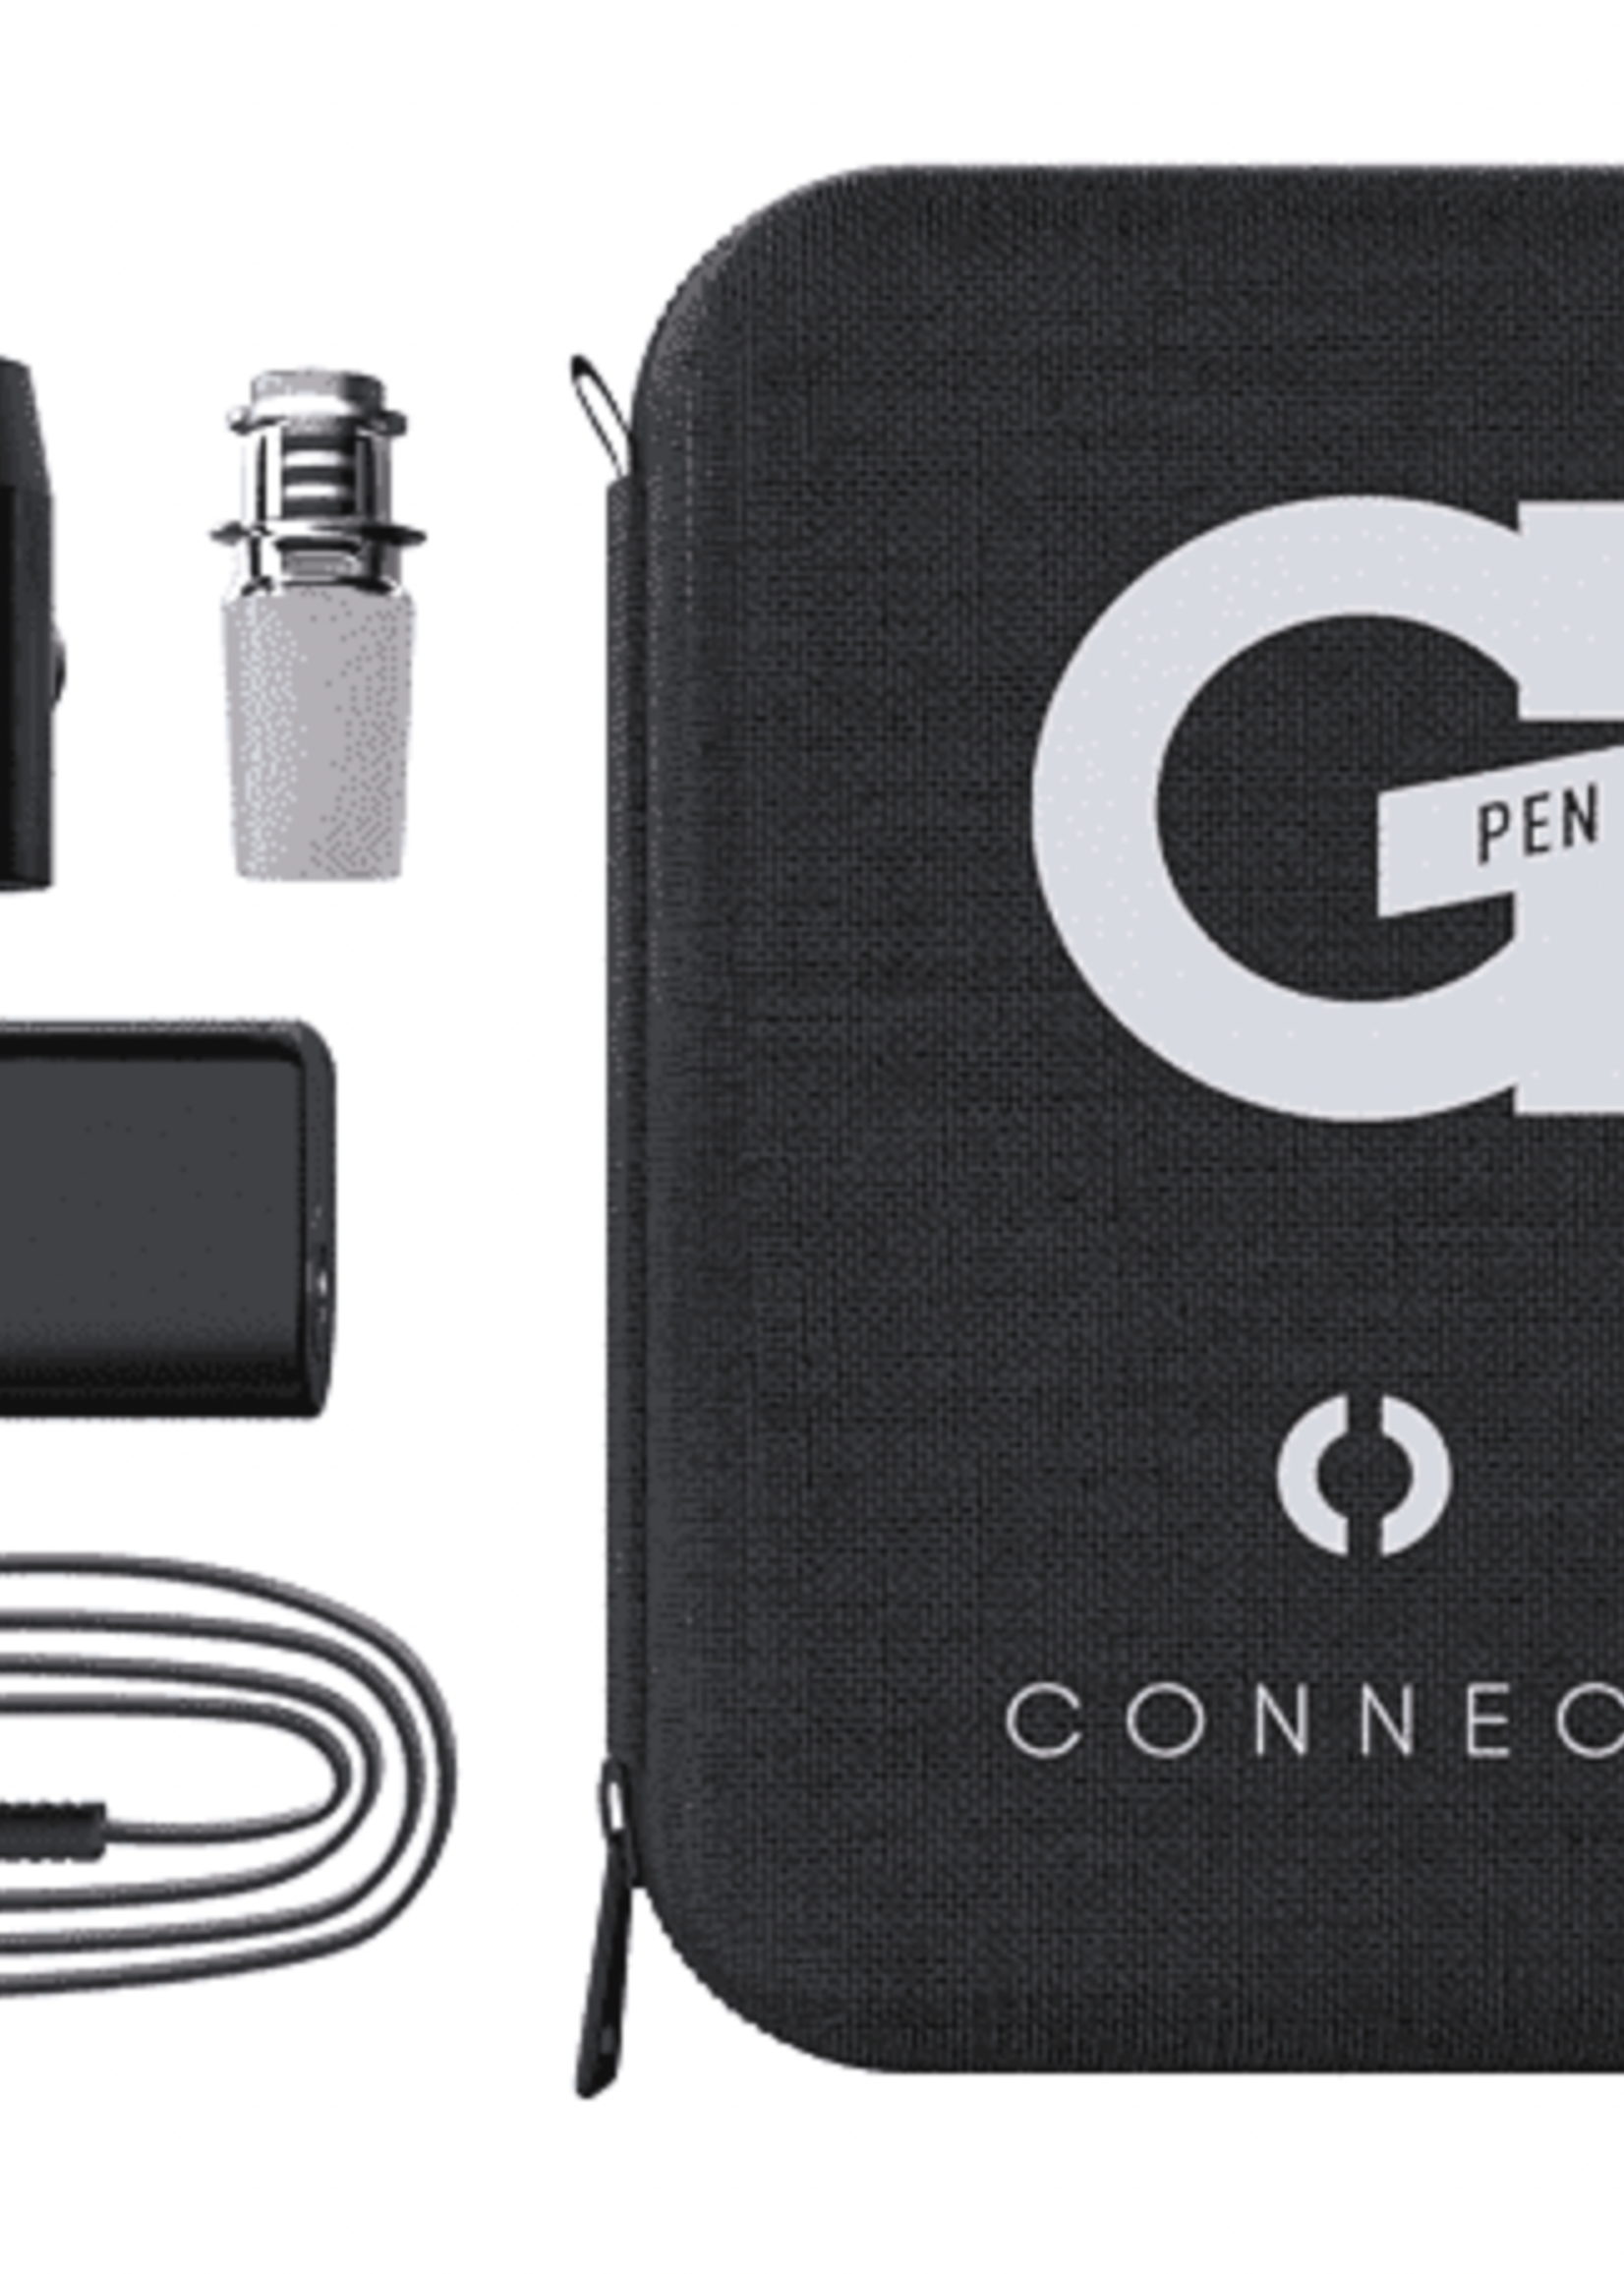 Grenco Science Gpen Connect Vaporizer